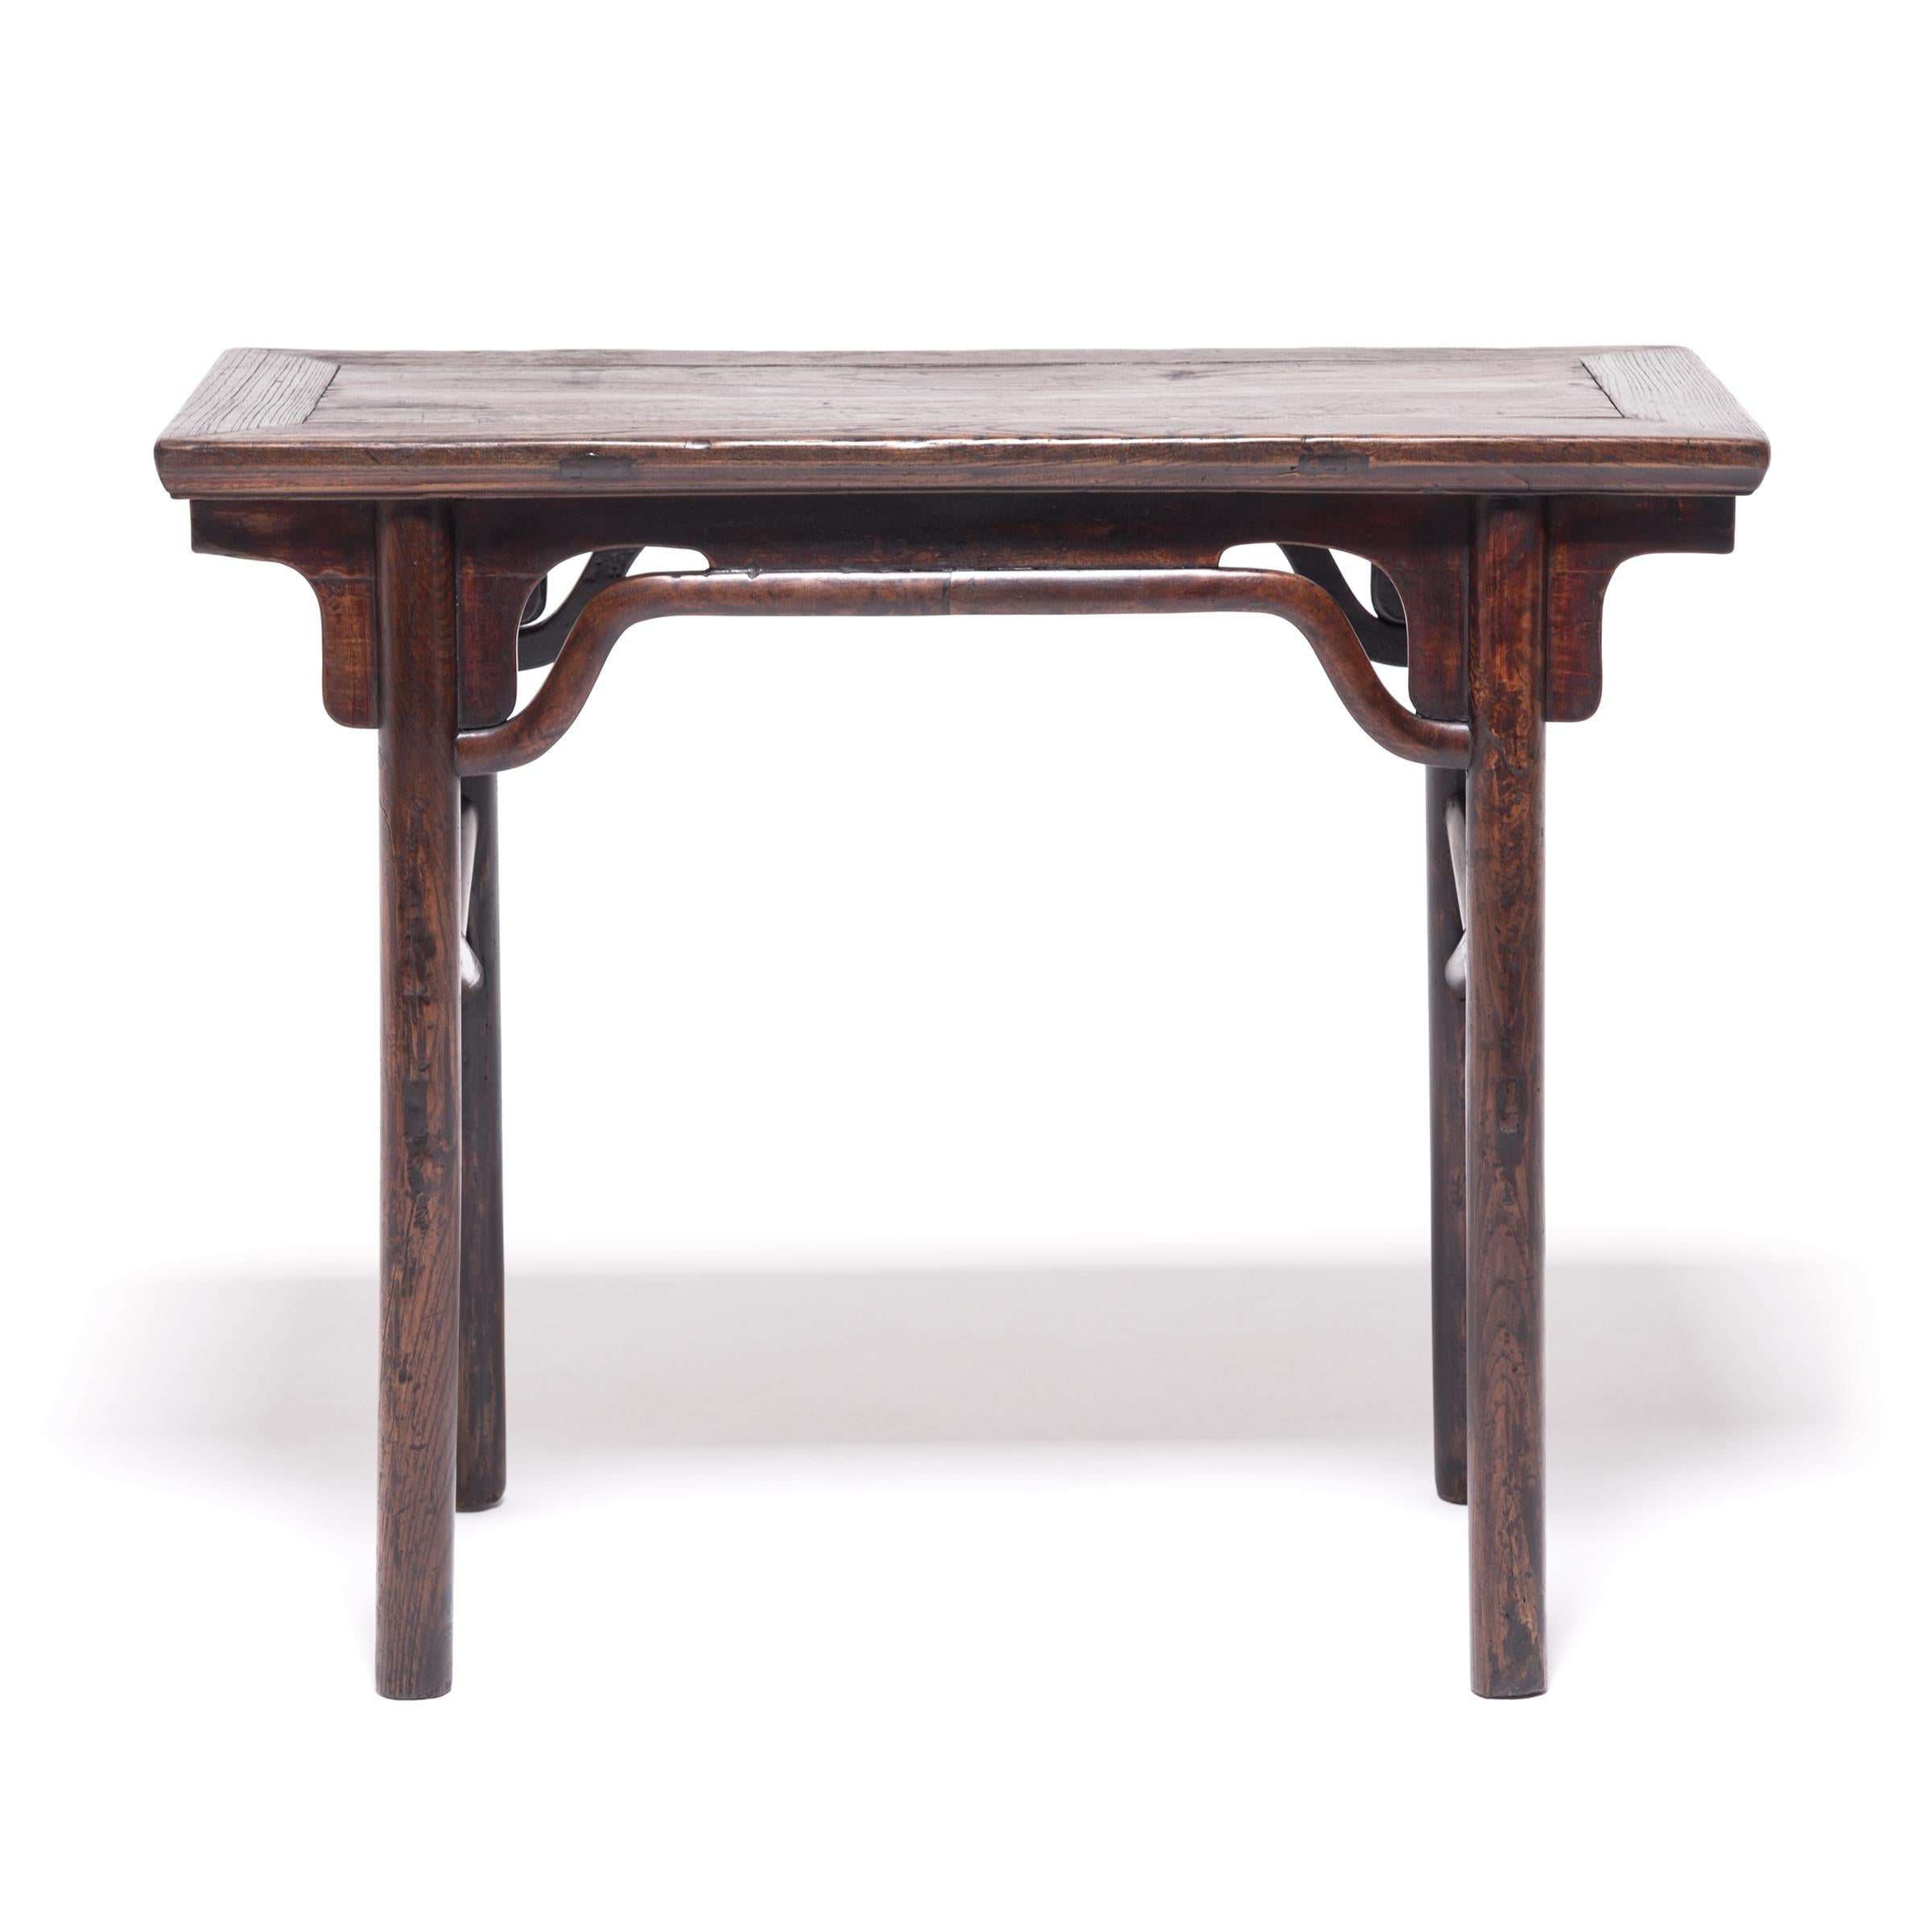 Chinese Wine Table with Crossed Stretchers, c. 1850 In Good Condition For Sale In Chicago, IL